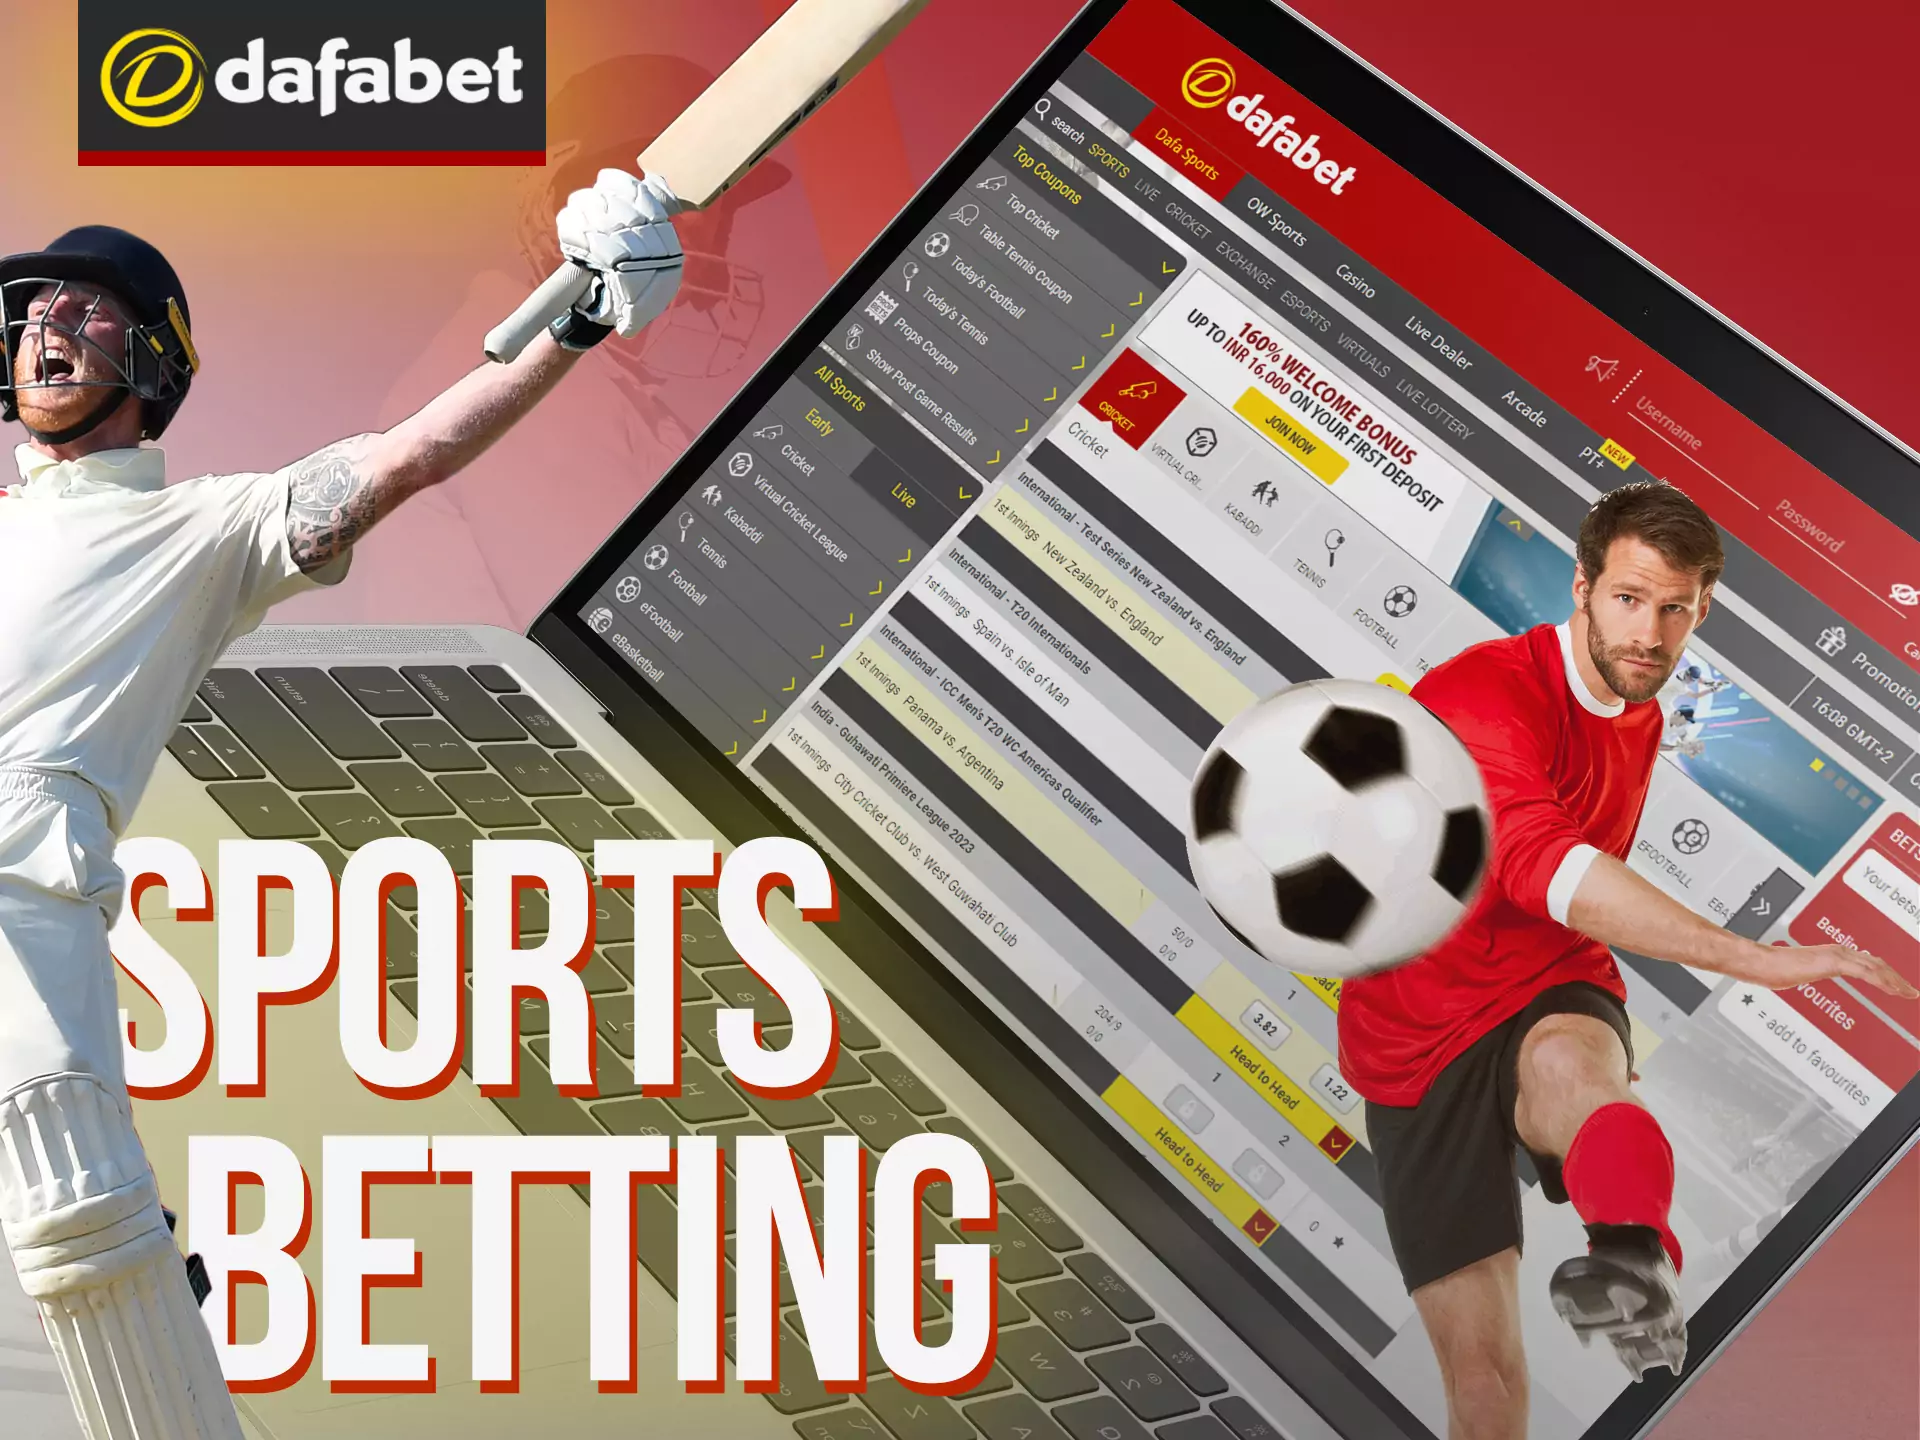 Place bets on a variety of sports at Dafabet.